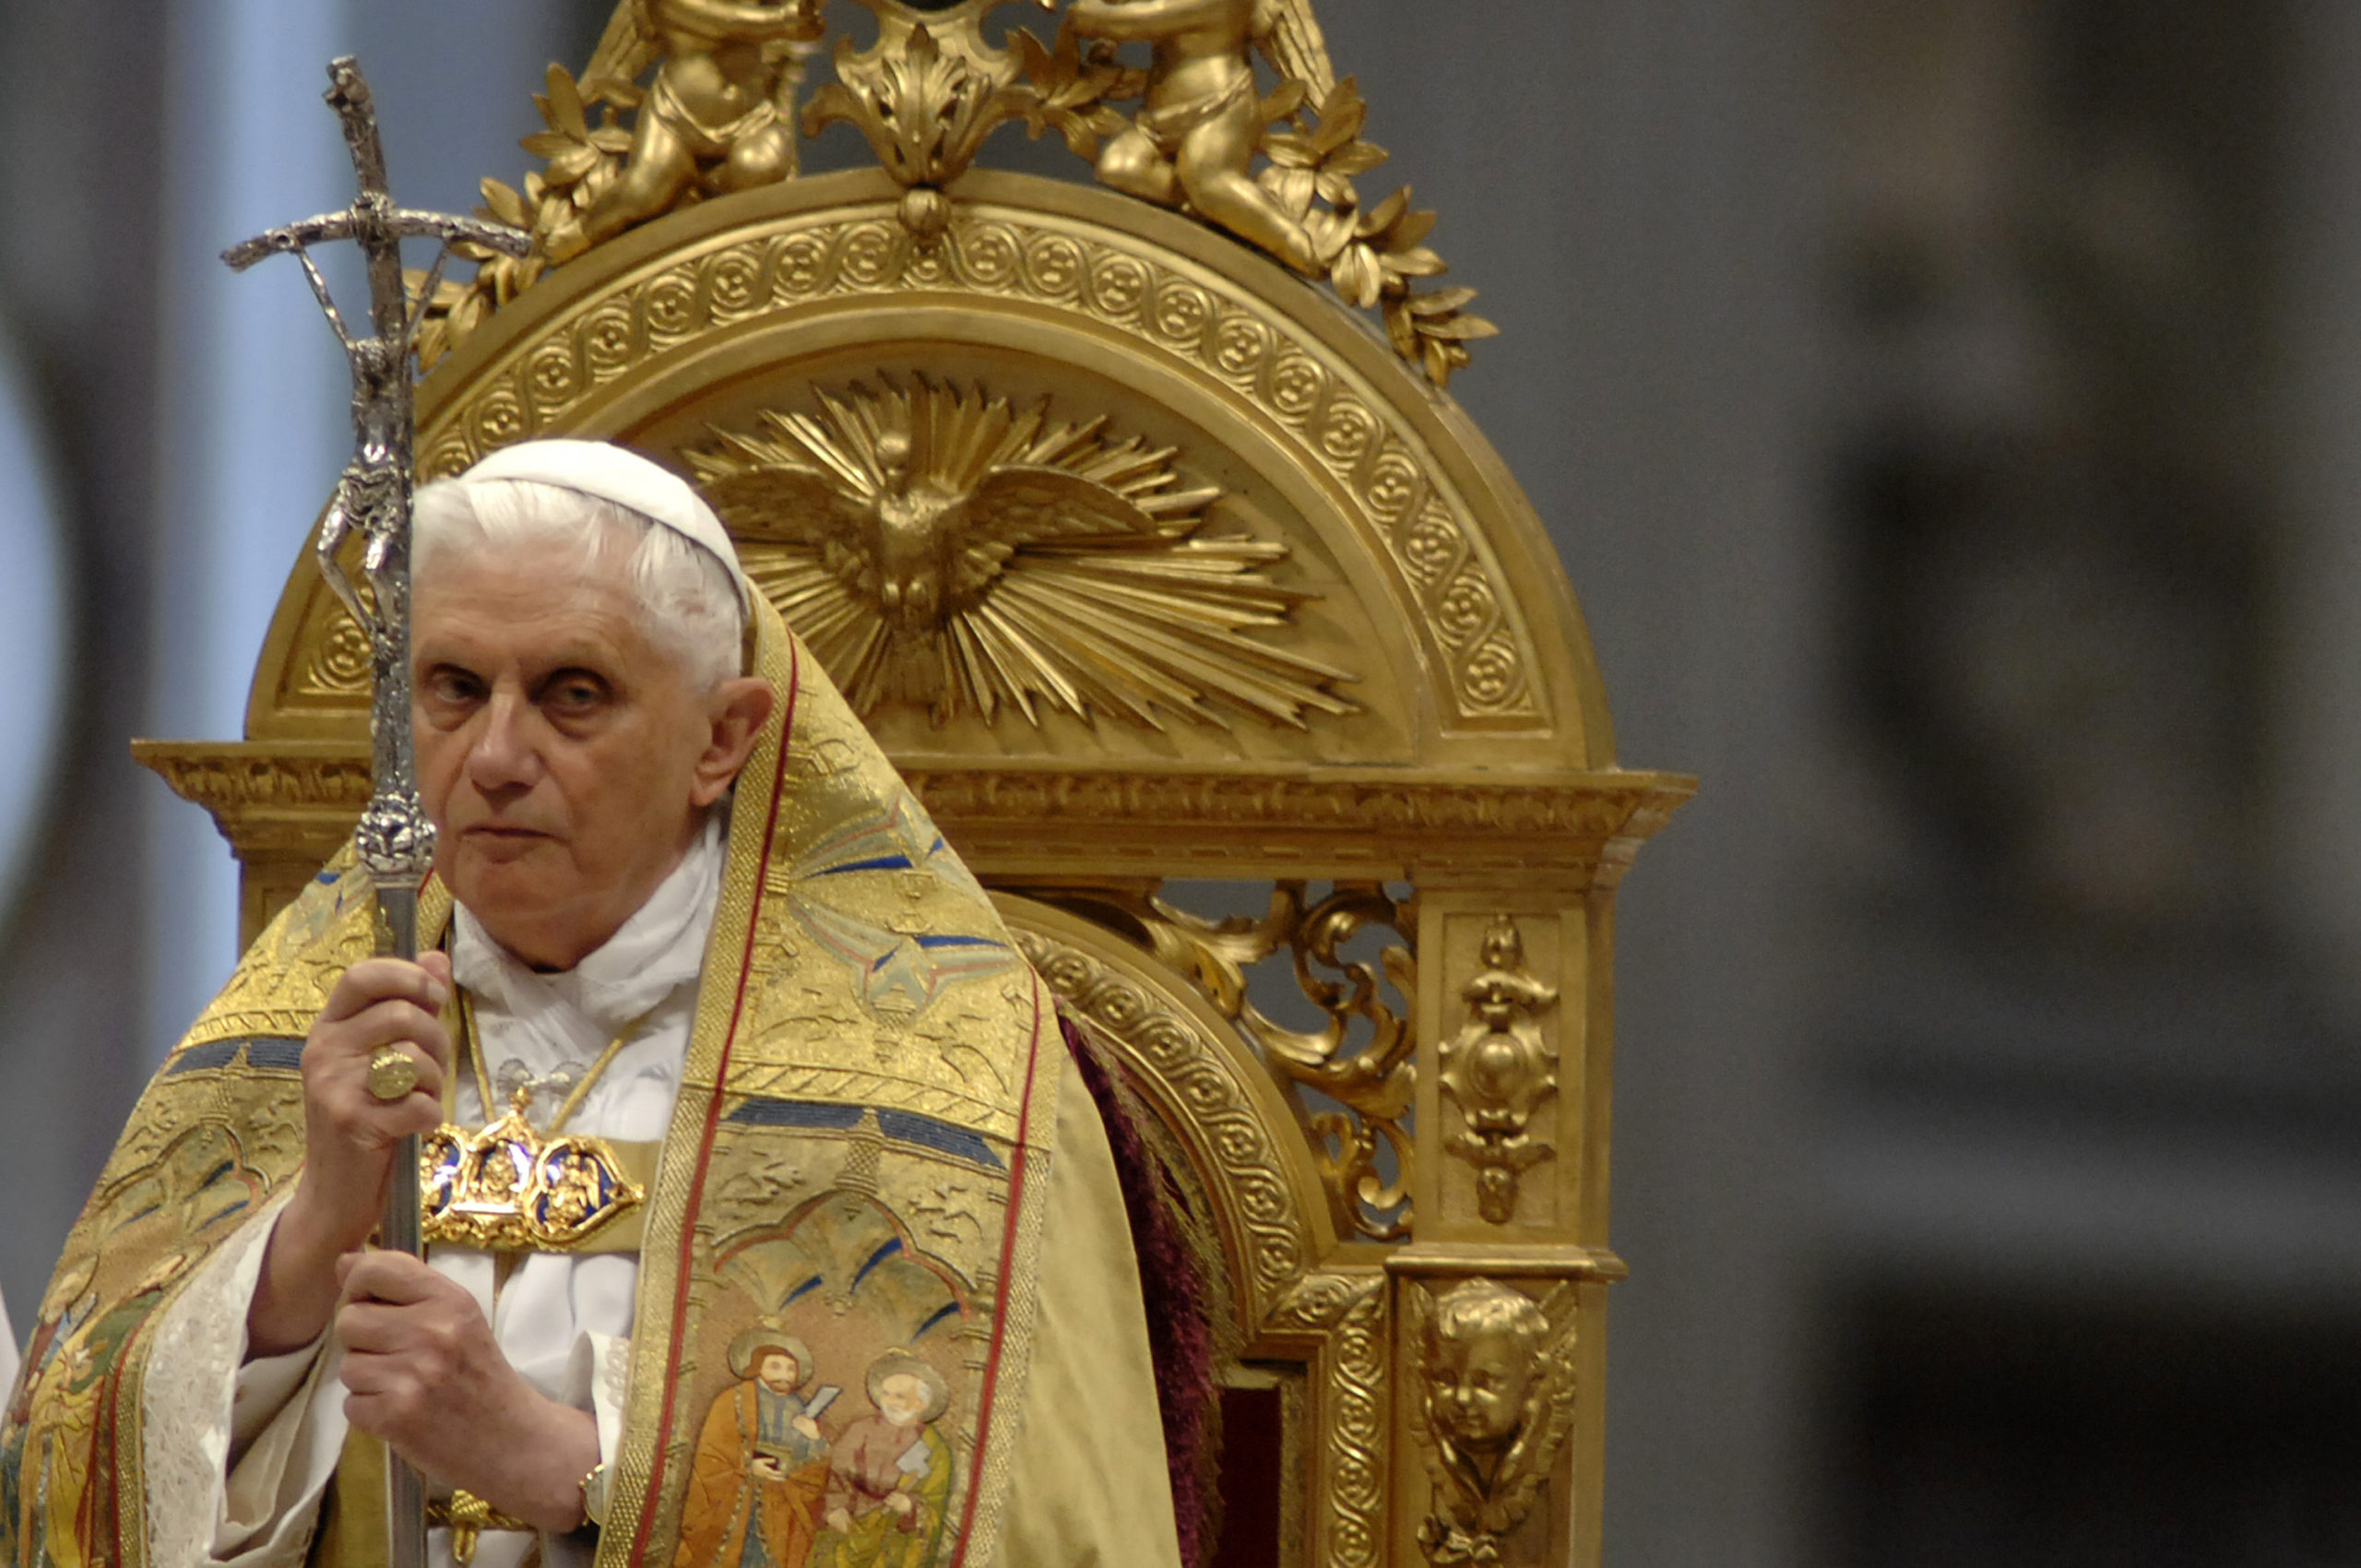 God Is Love: A Reflection on Benedict XVI’s Encyclicals